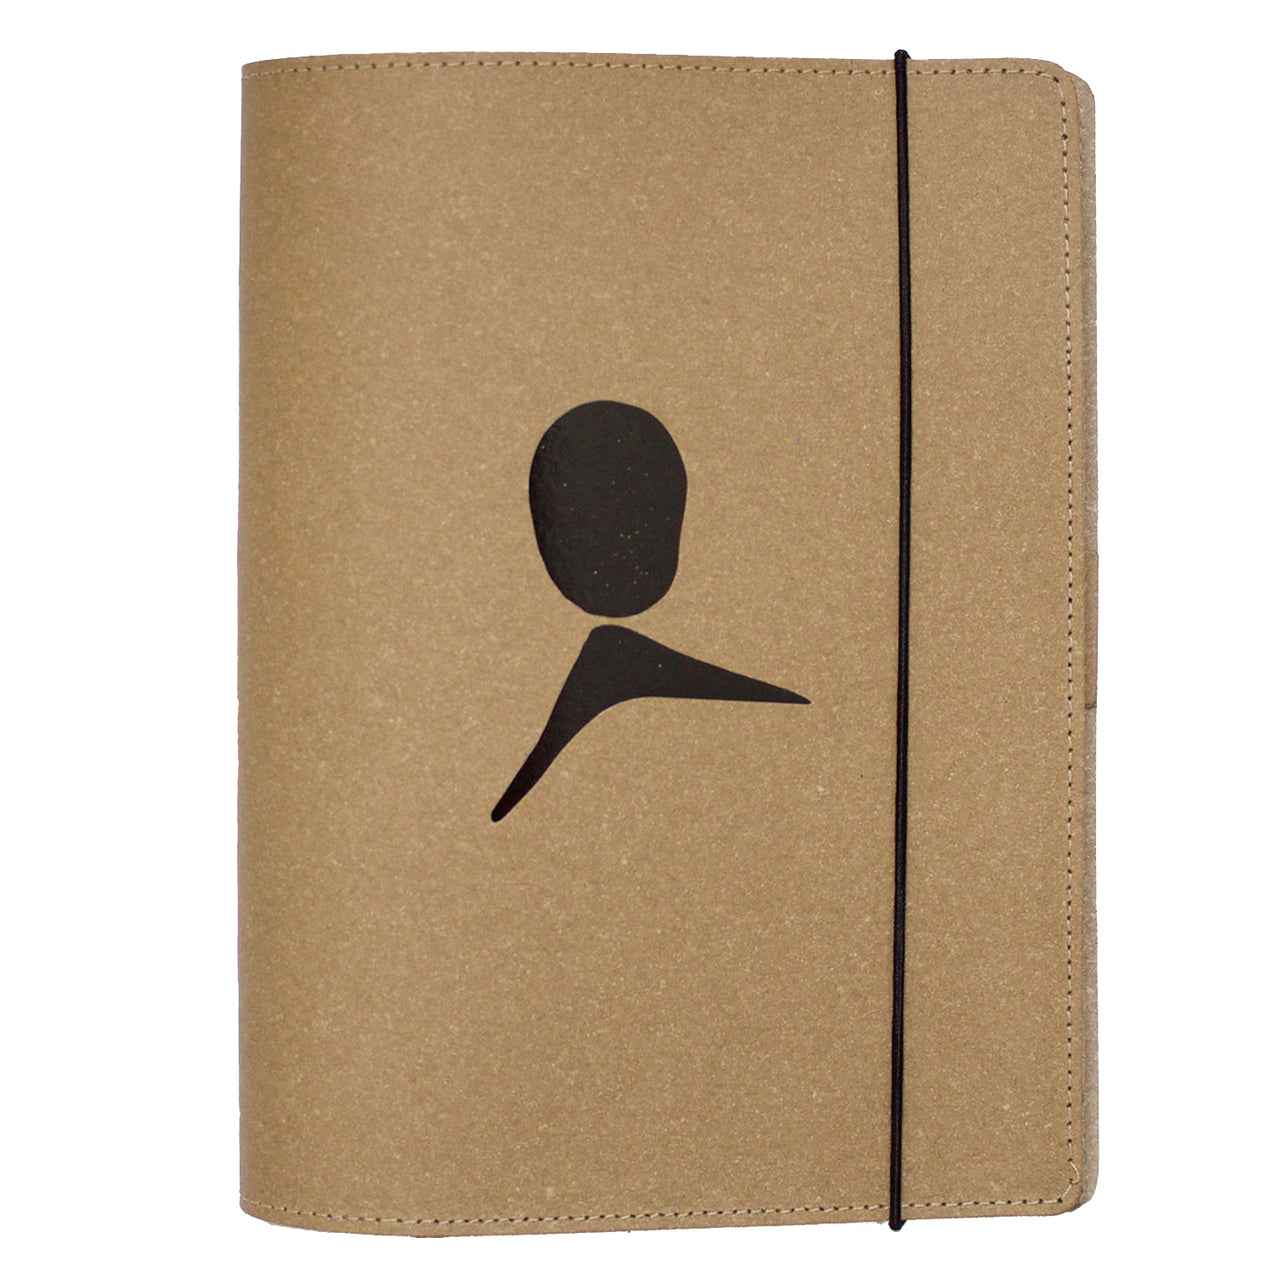 Barran Giirr Recycled Leather Journal